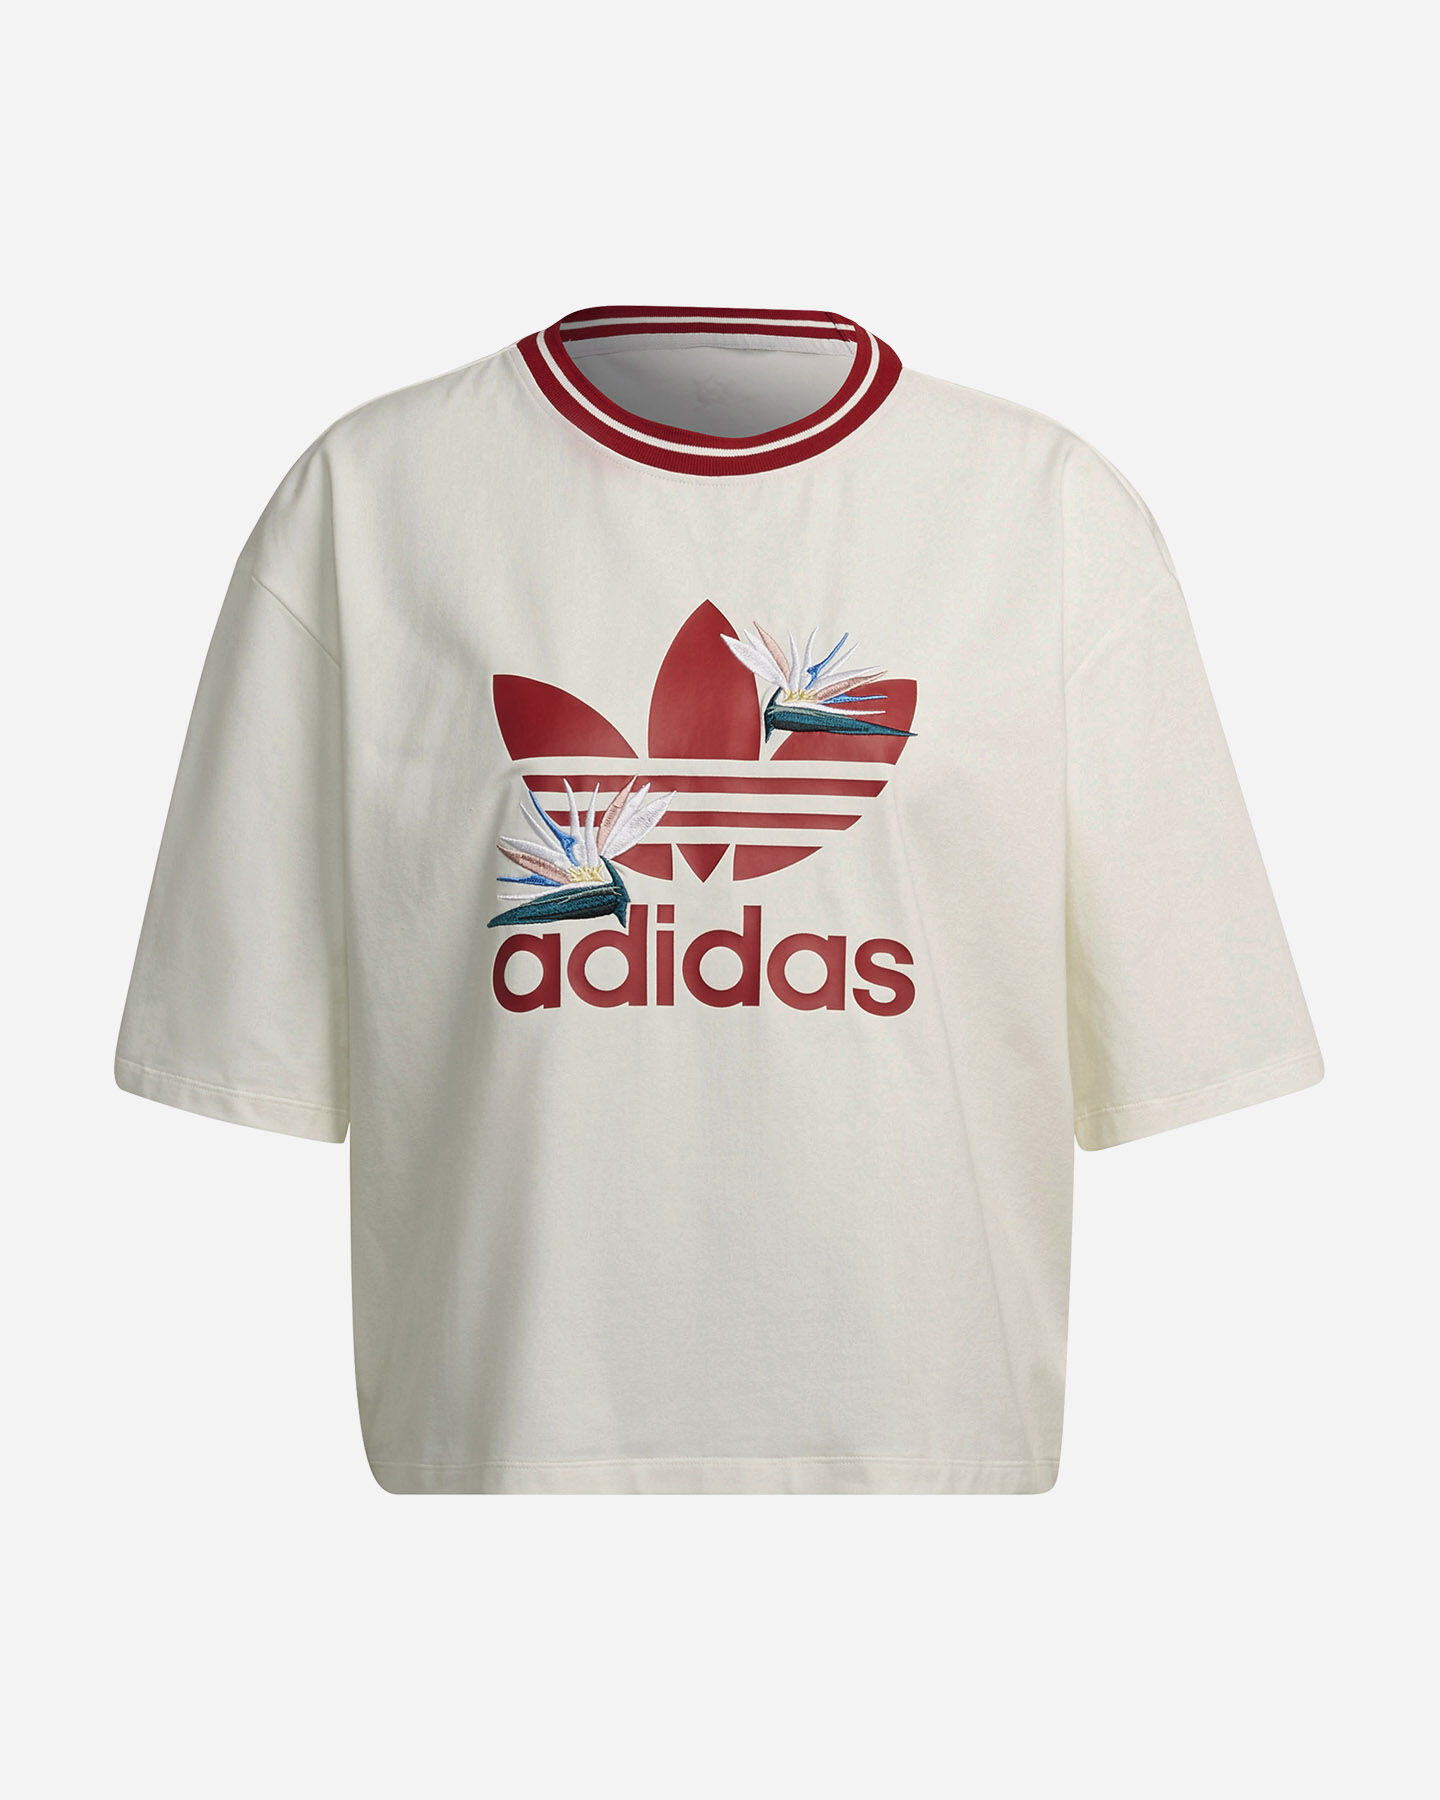  T-Shirt ADIDAS ORIGINAL LOOSE THEBE W S5466893|UNI|56 scatto 0